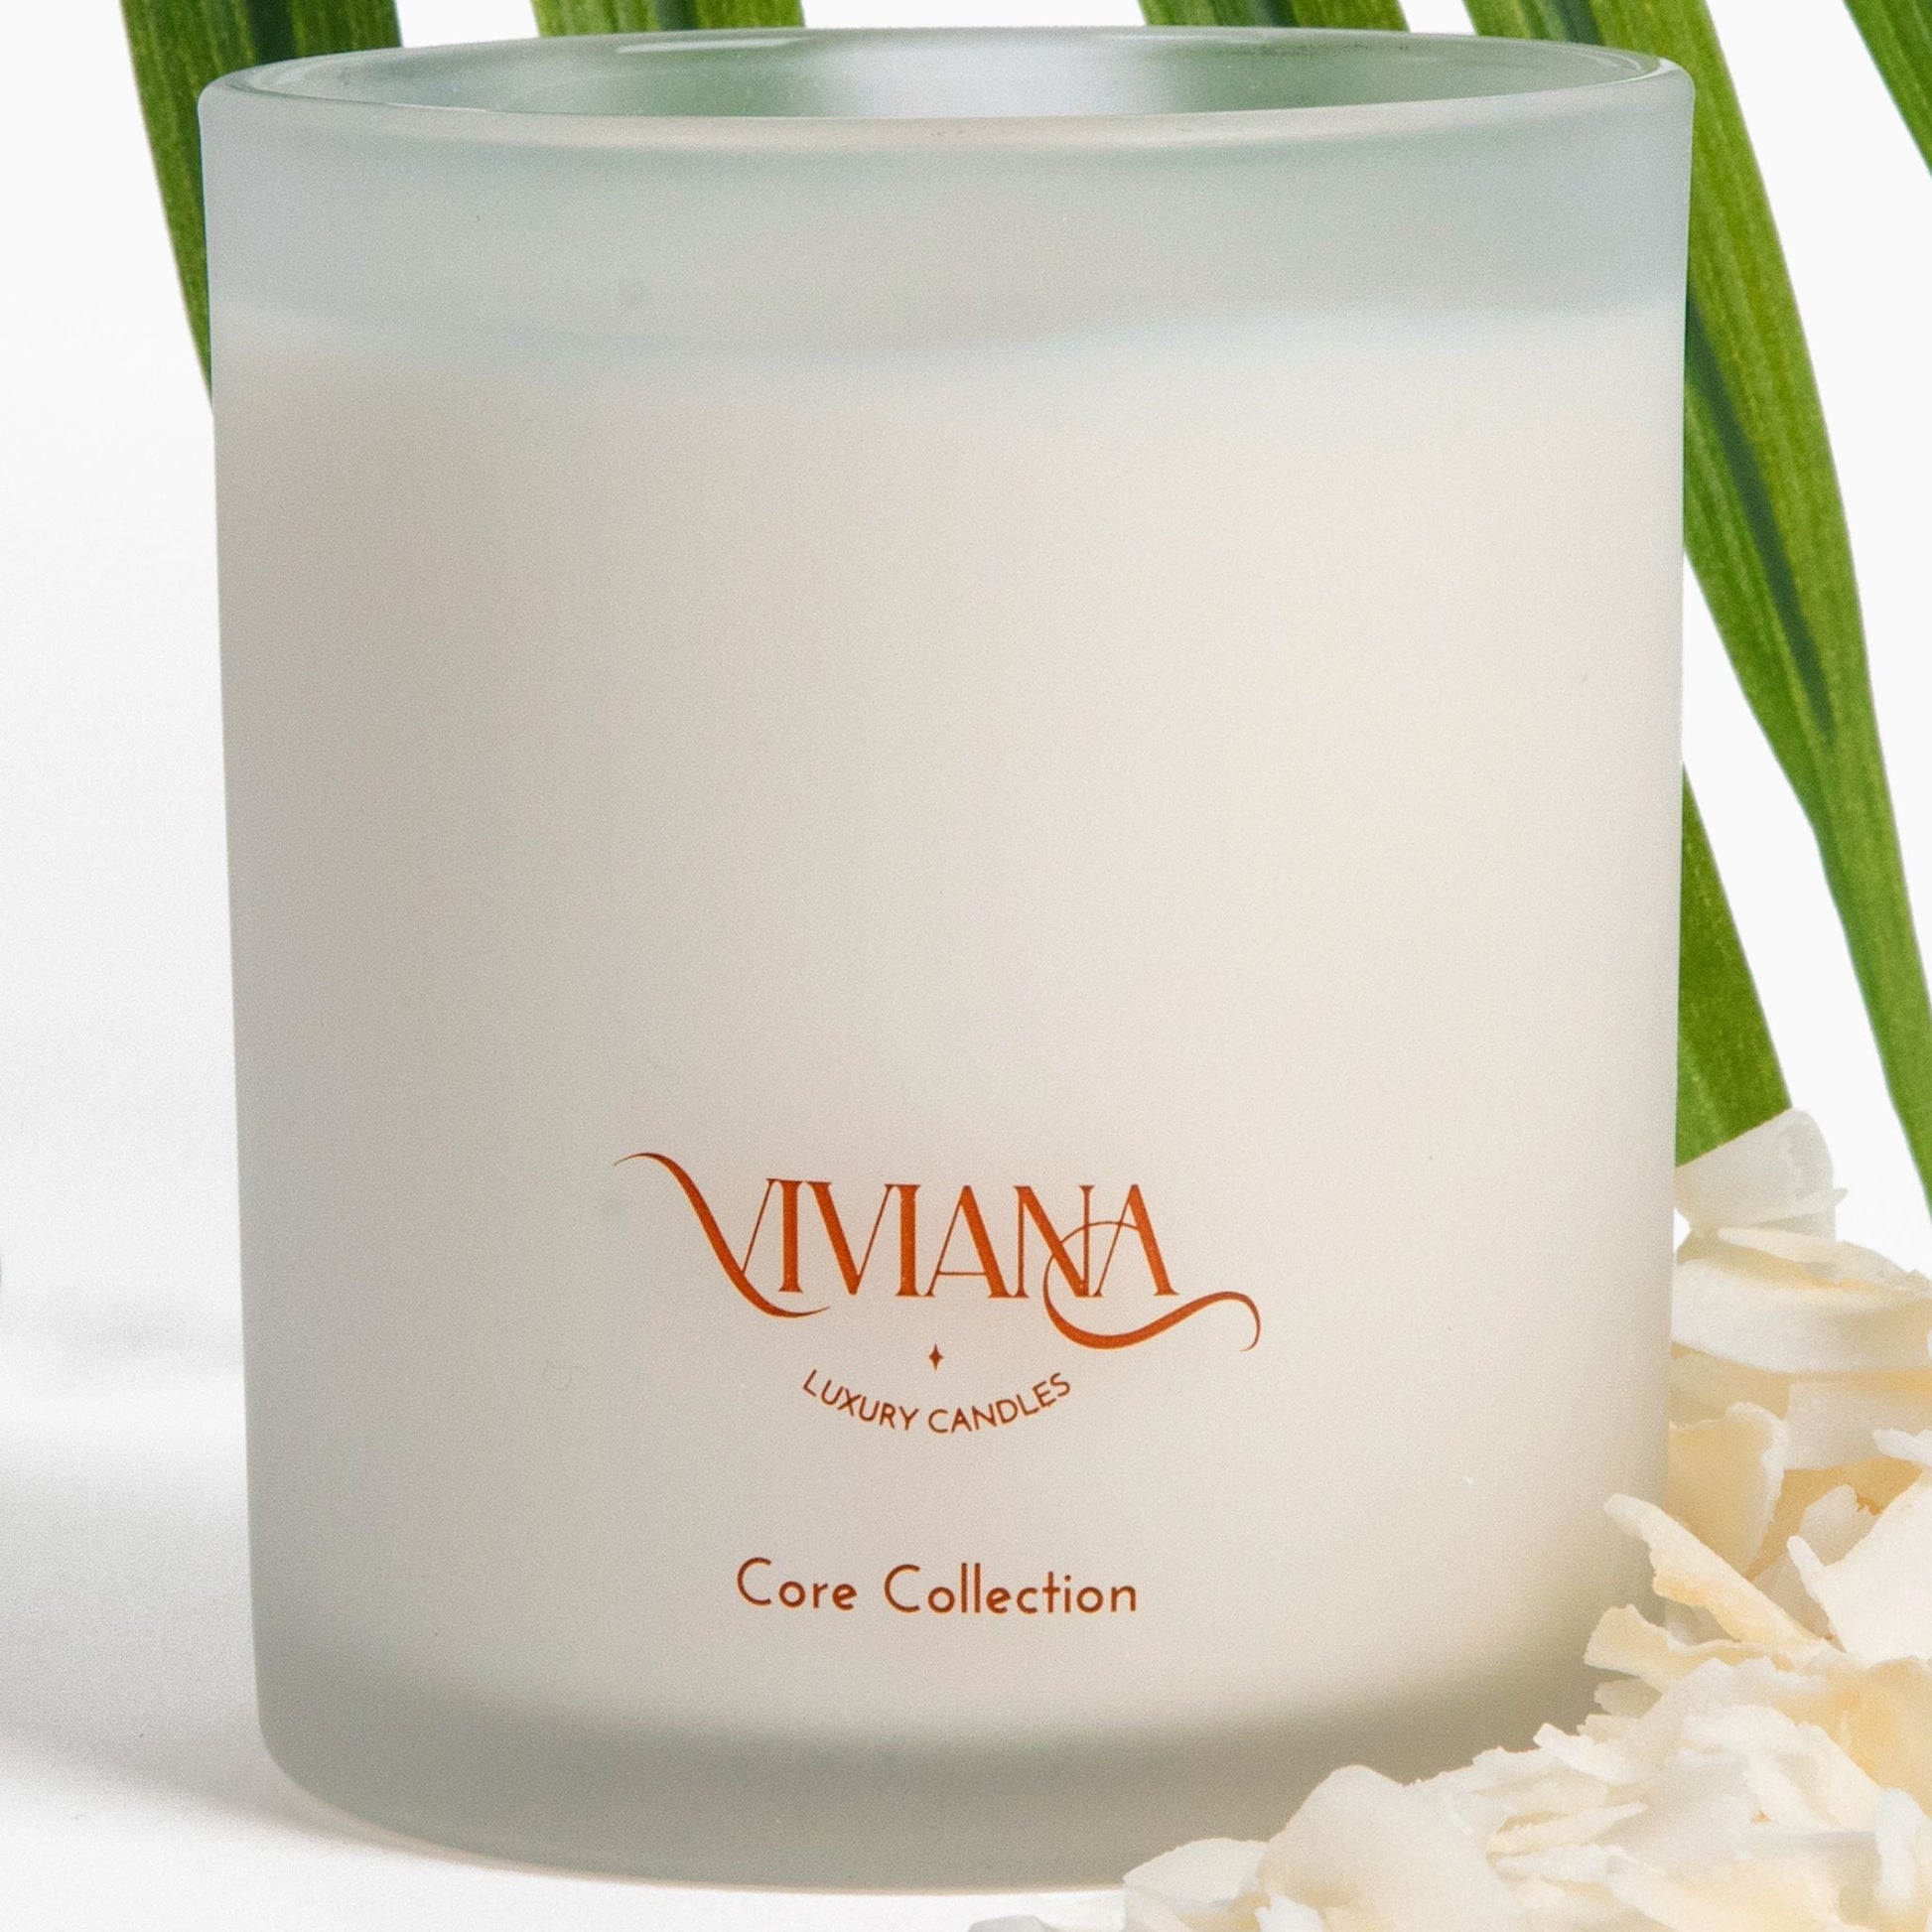 Wholesale coconut wax for candle making To Meet All Your Candle